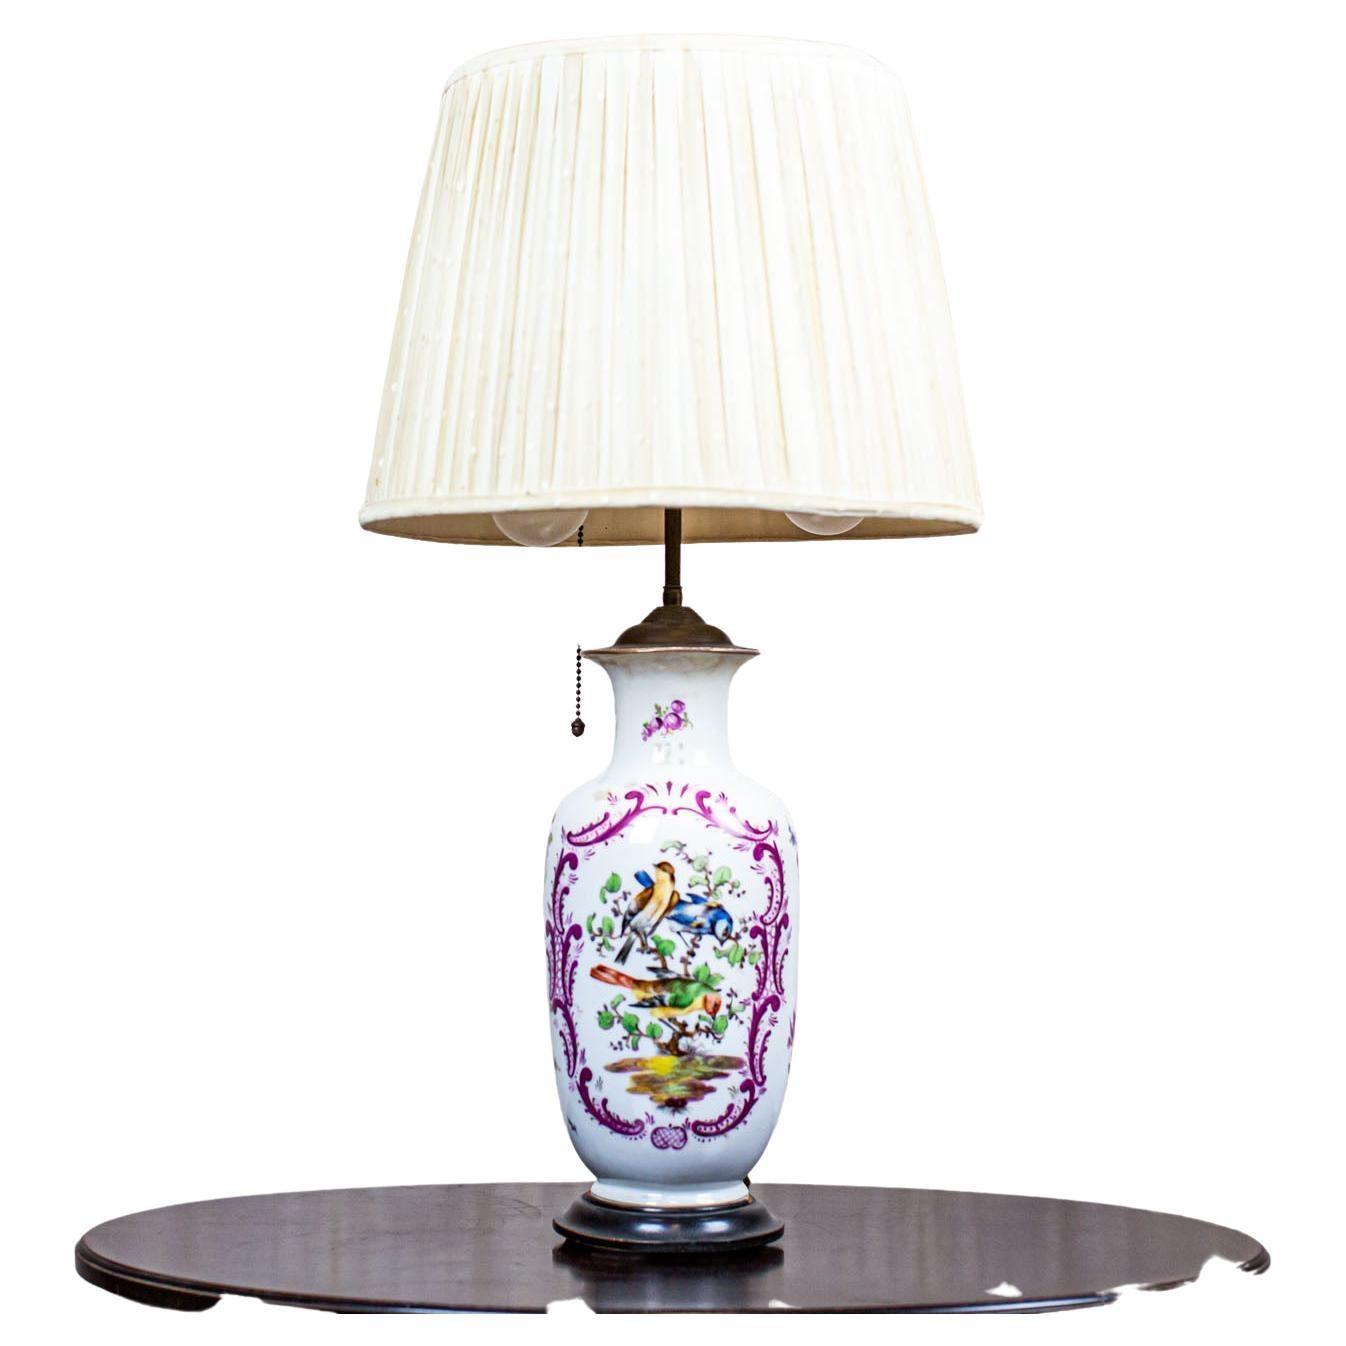 20th-Century Electric Table Lamp with Decorative Ceramic Base